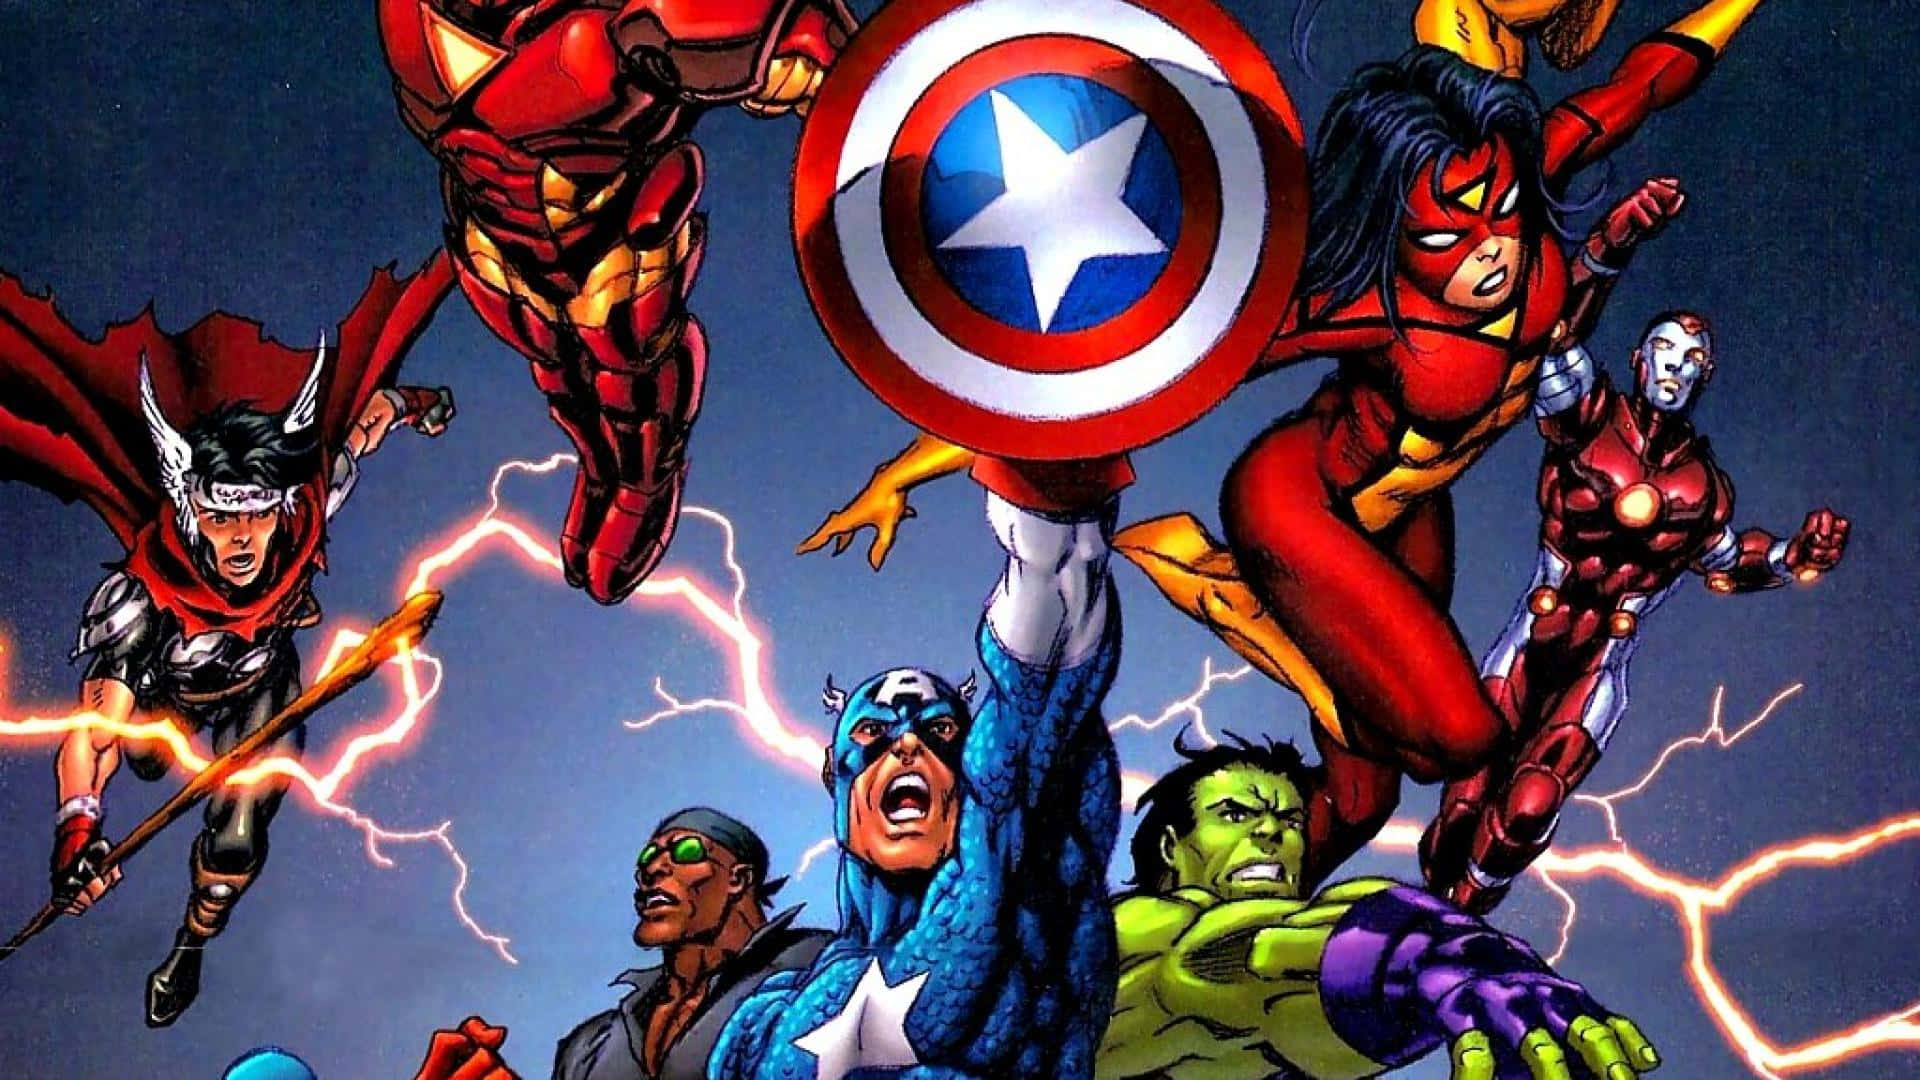 Earth's Mightiest Heroes Unite to Defeat Evil Wallpaper